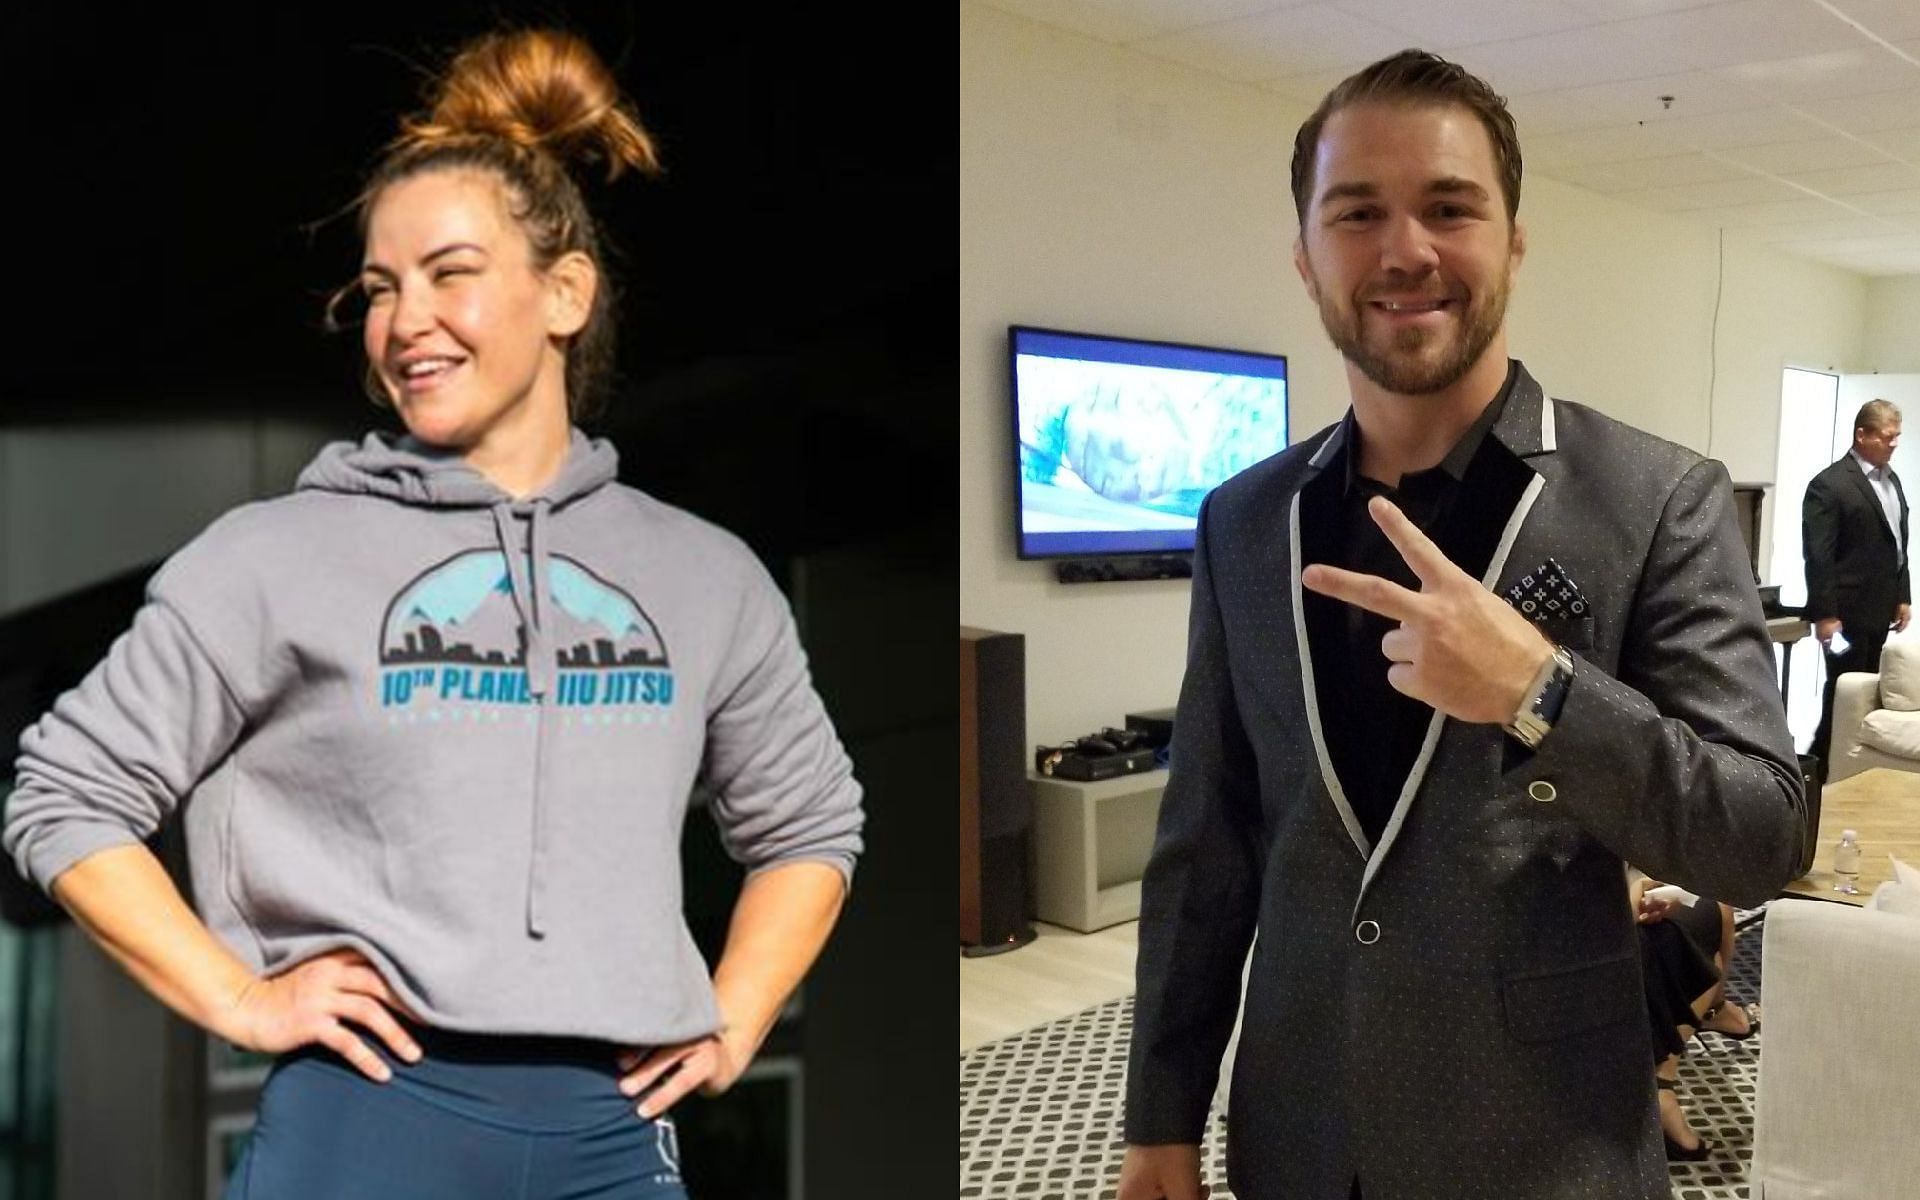 Miesha Tate (Left) and Bryan Caraway (Right) (Images via @mieshatate Instagram and @BryanCaraway 